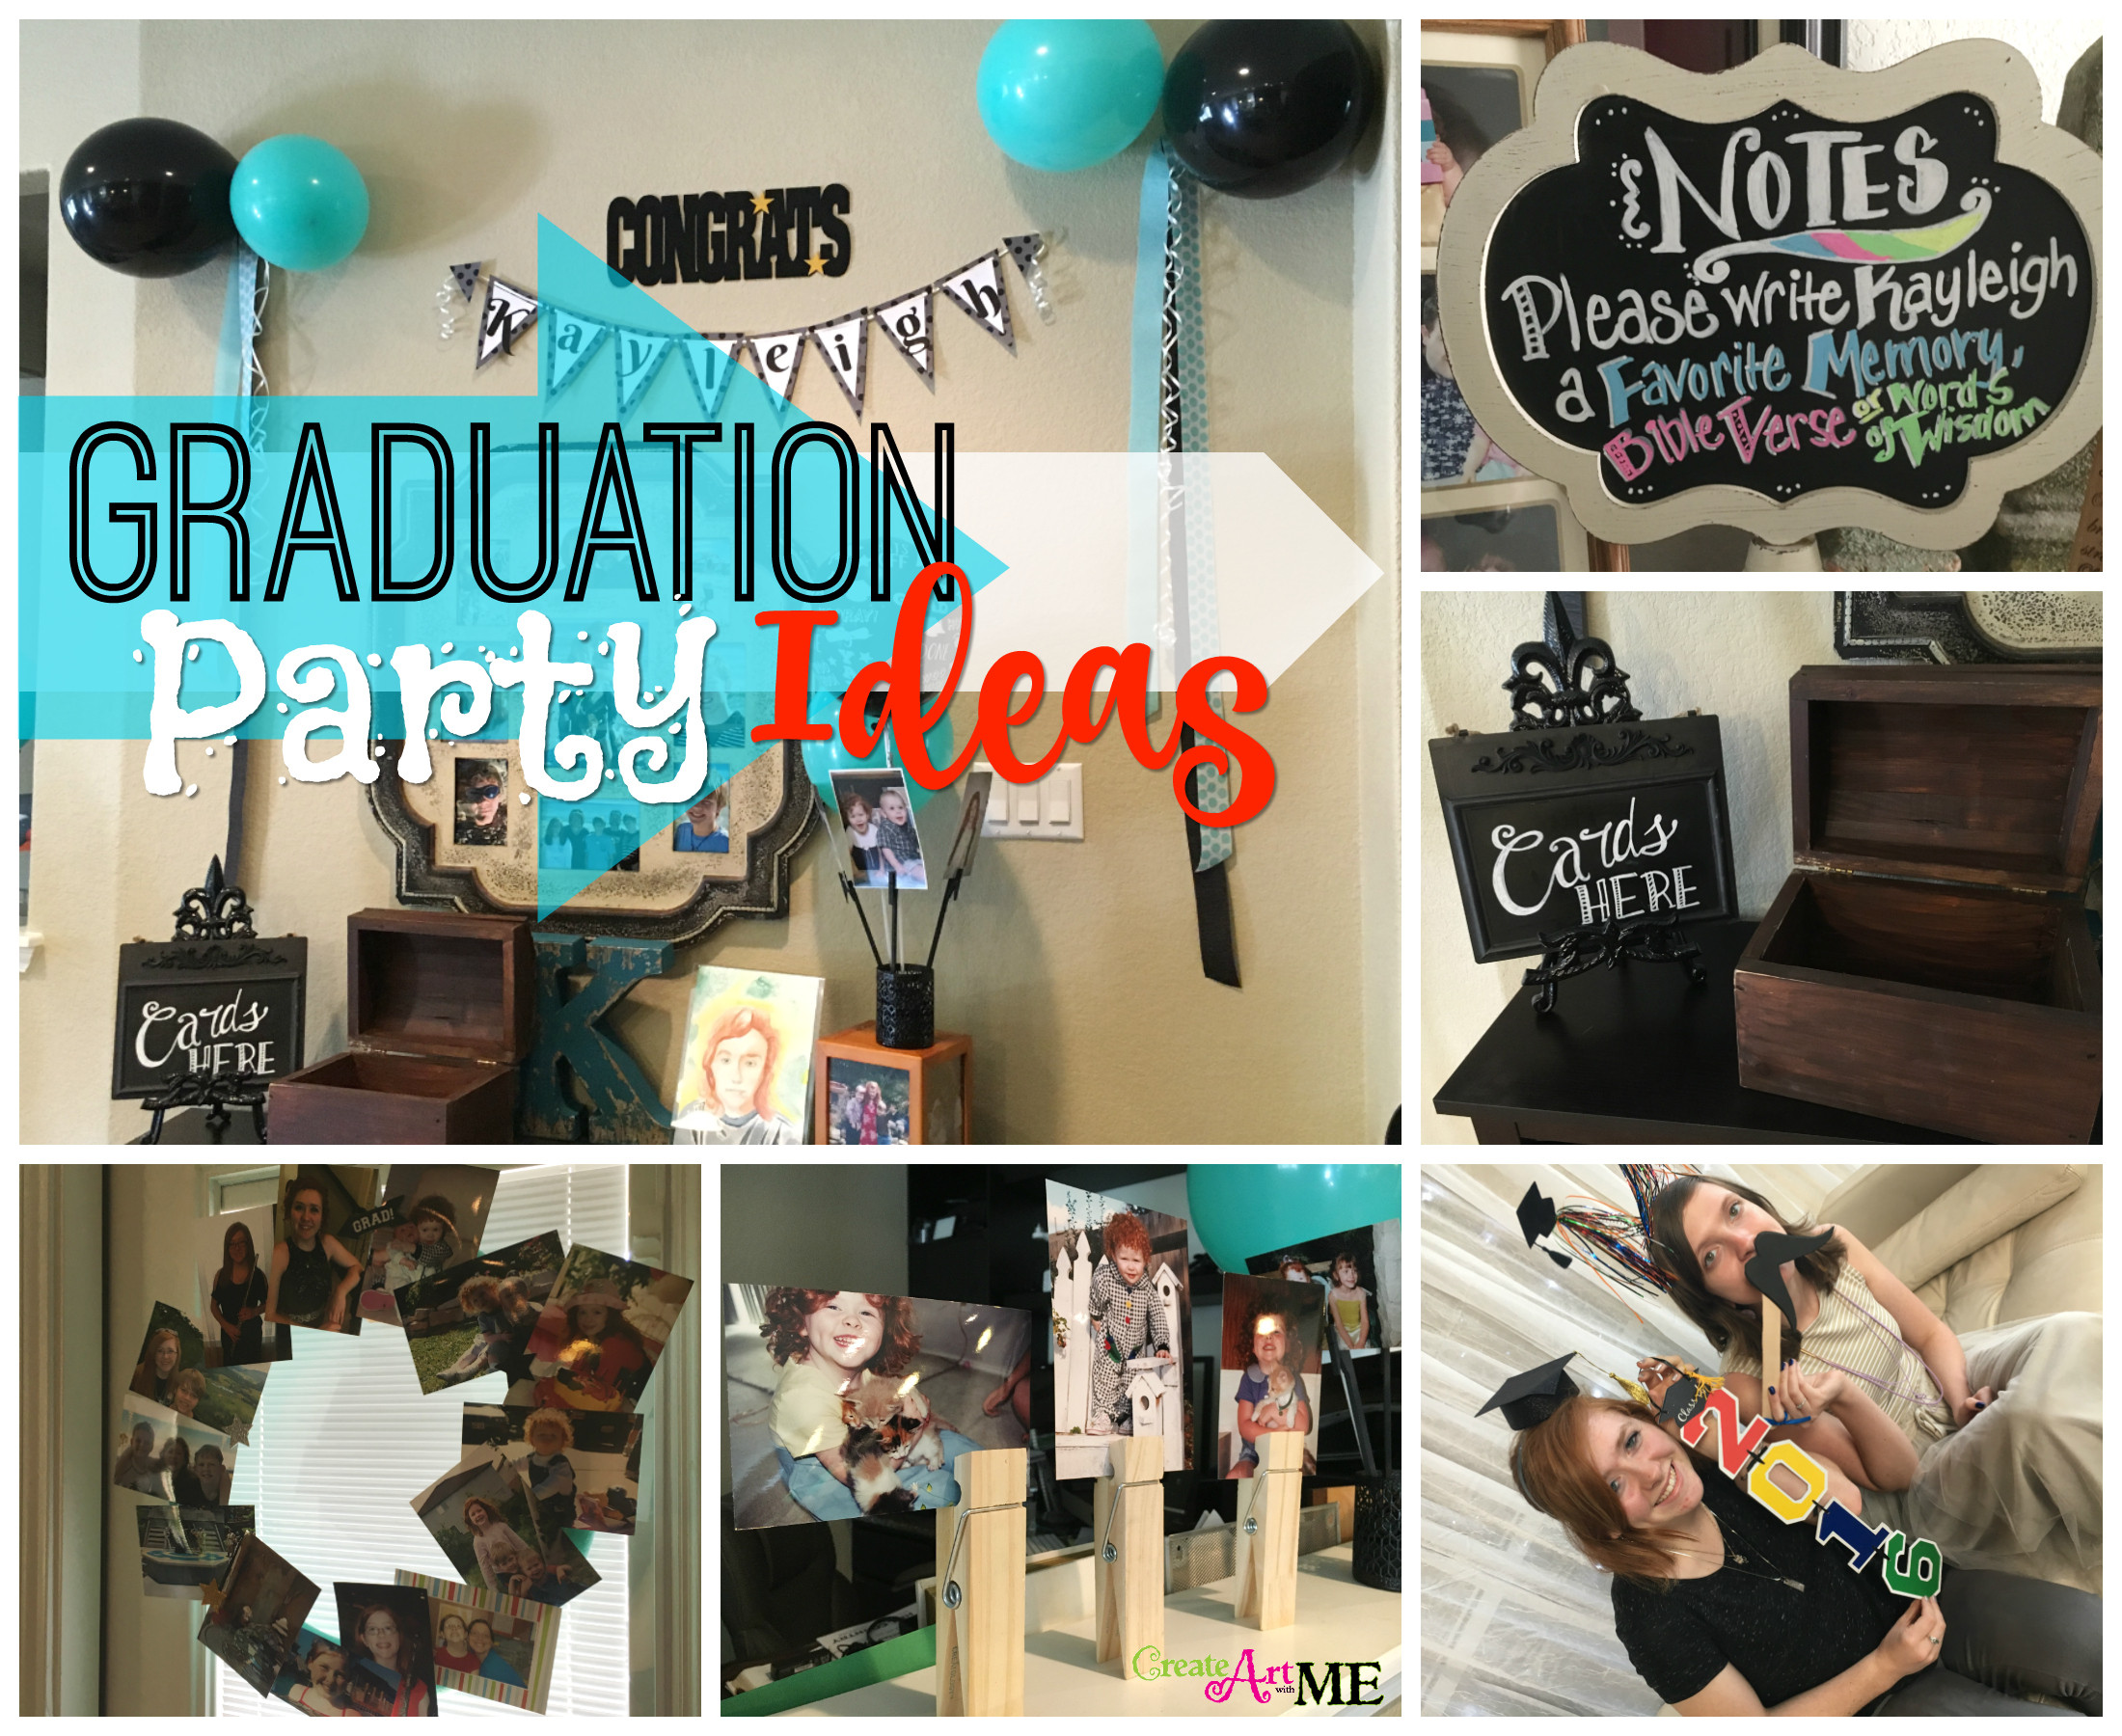 After Graduation Party Ideas
 Graduation Party Ideas Create Art with ME